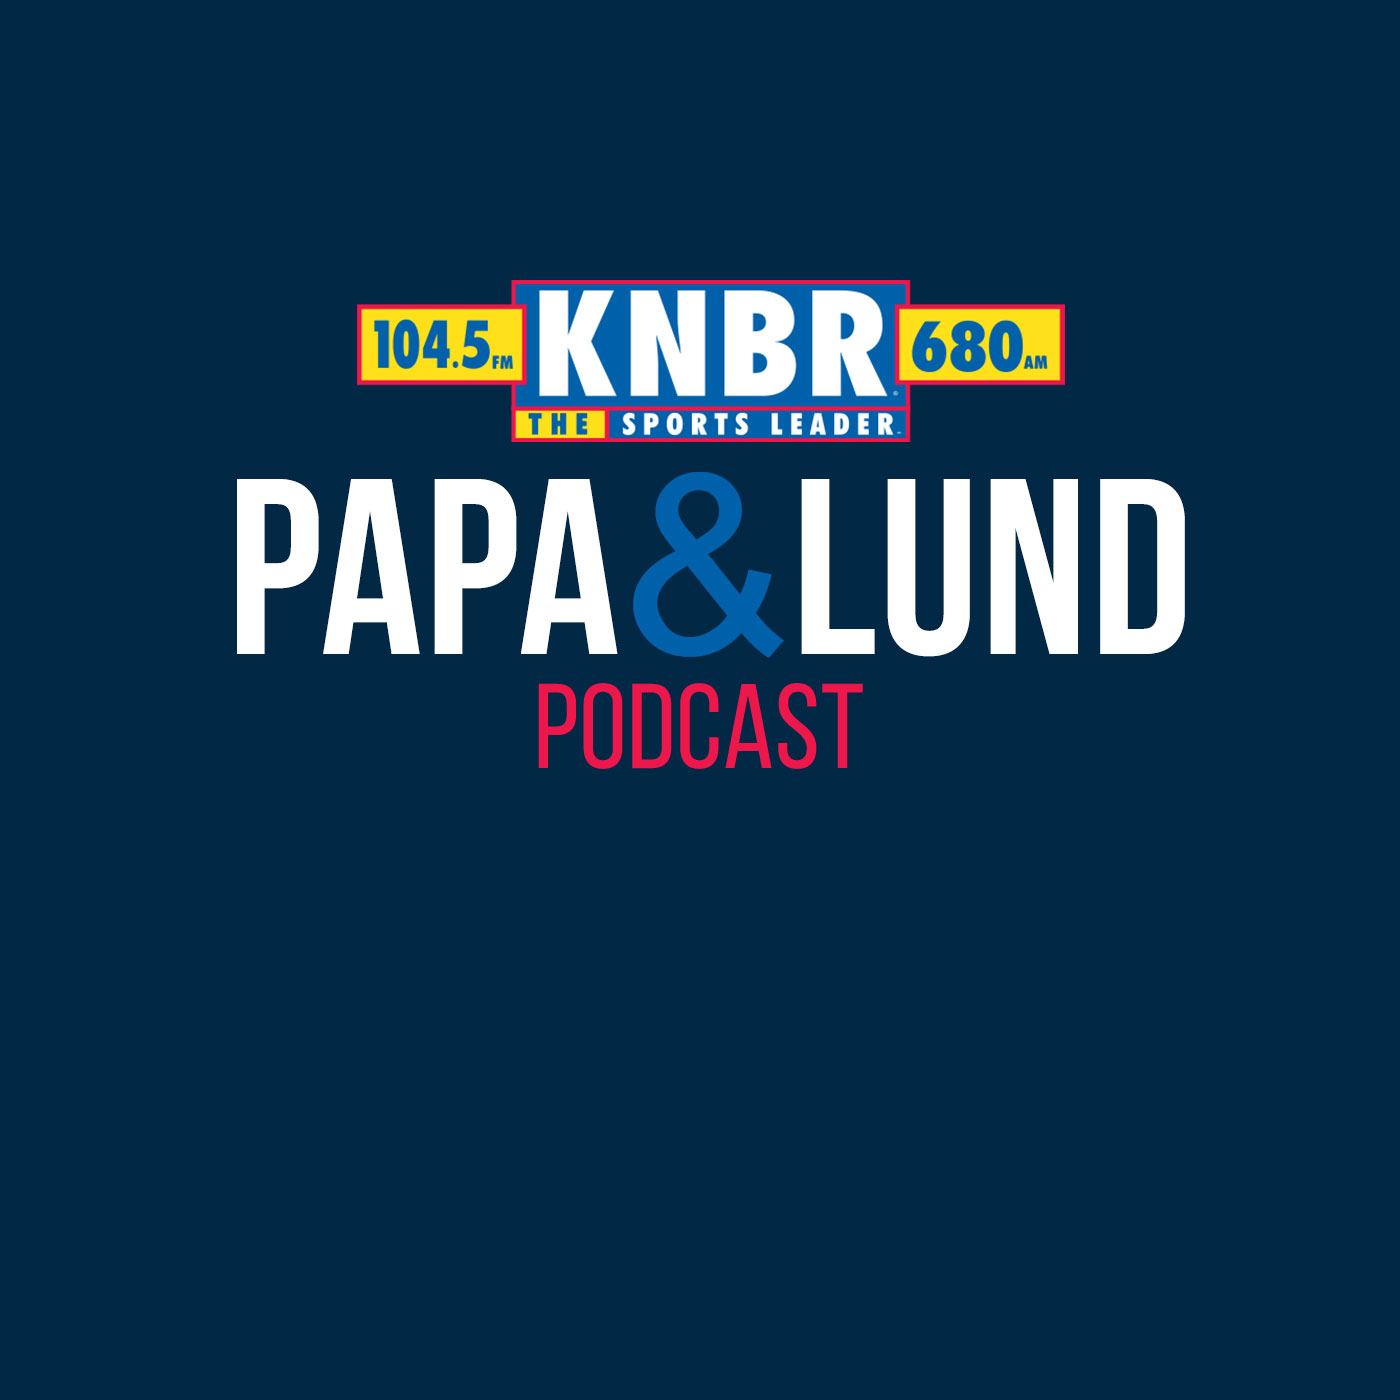 5-26 Tim Ryan joins Papa & Lund to break down all the good looking 49ers at OTA's, how is Trey Lance, and will Brock Purdy be ready for the season